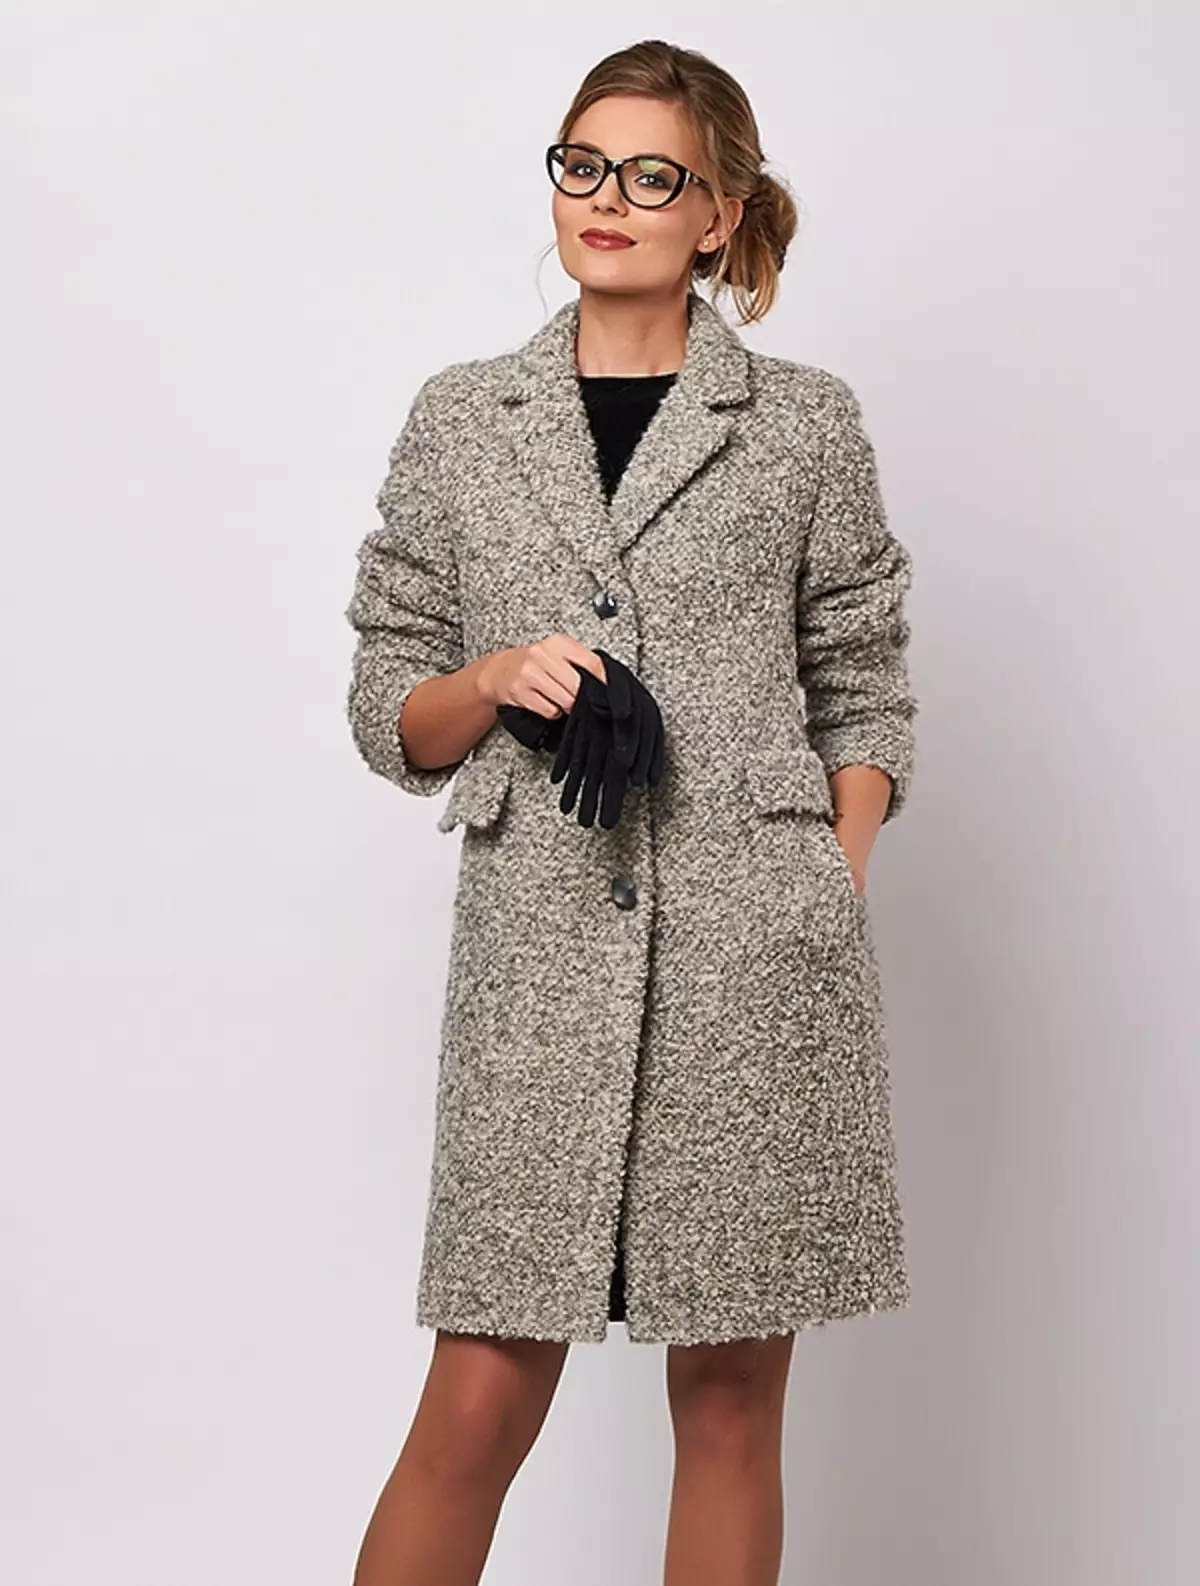 Personne Coat (30 larawan): Female luxury models from person 351_10